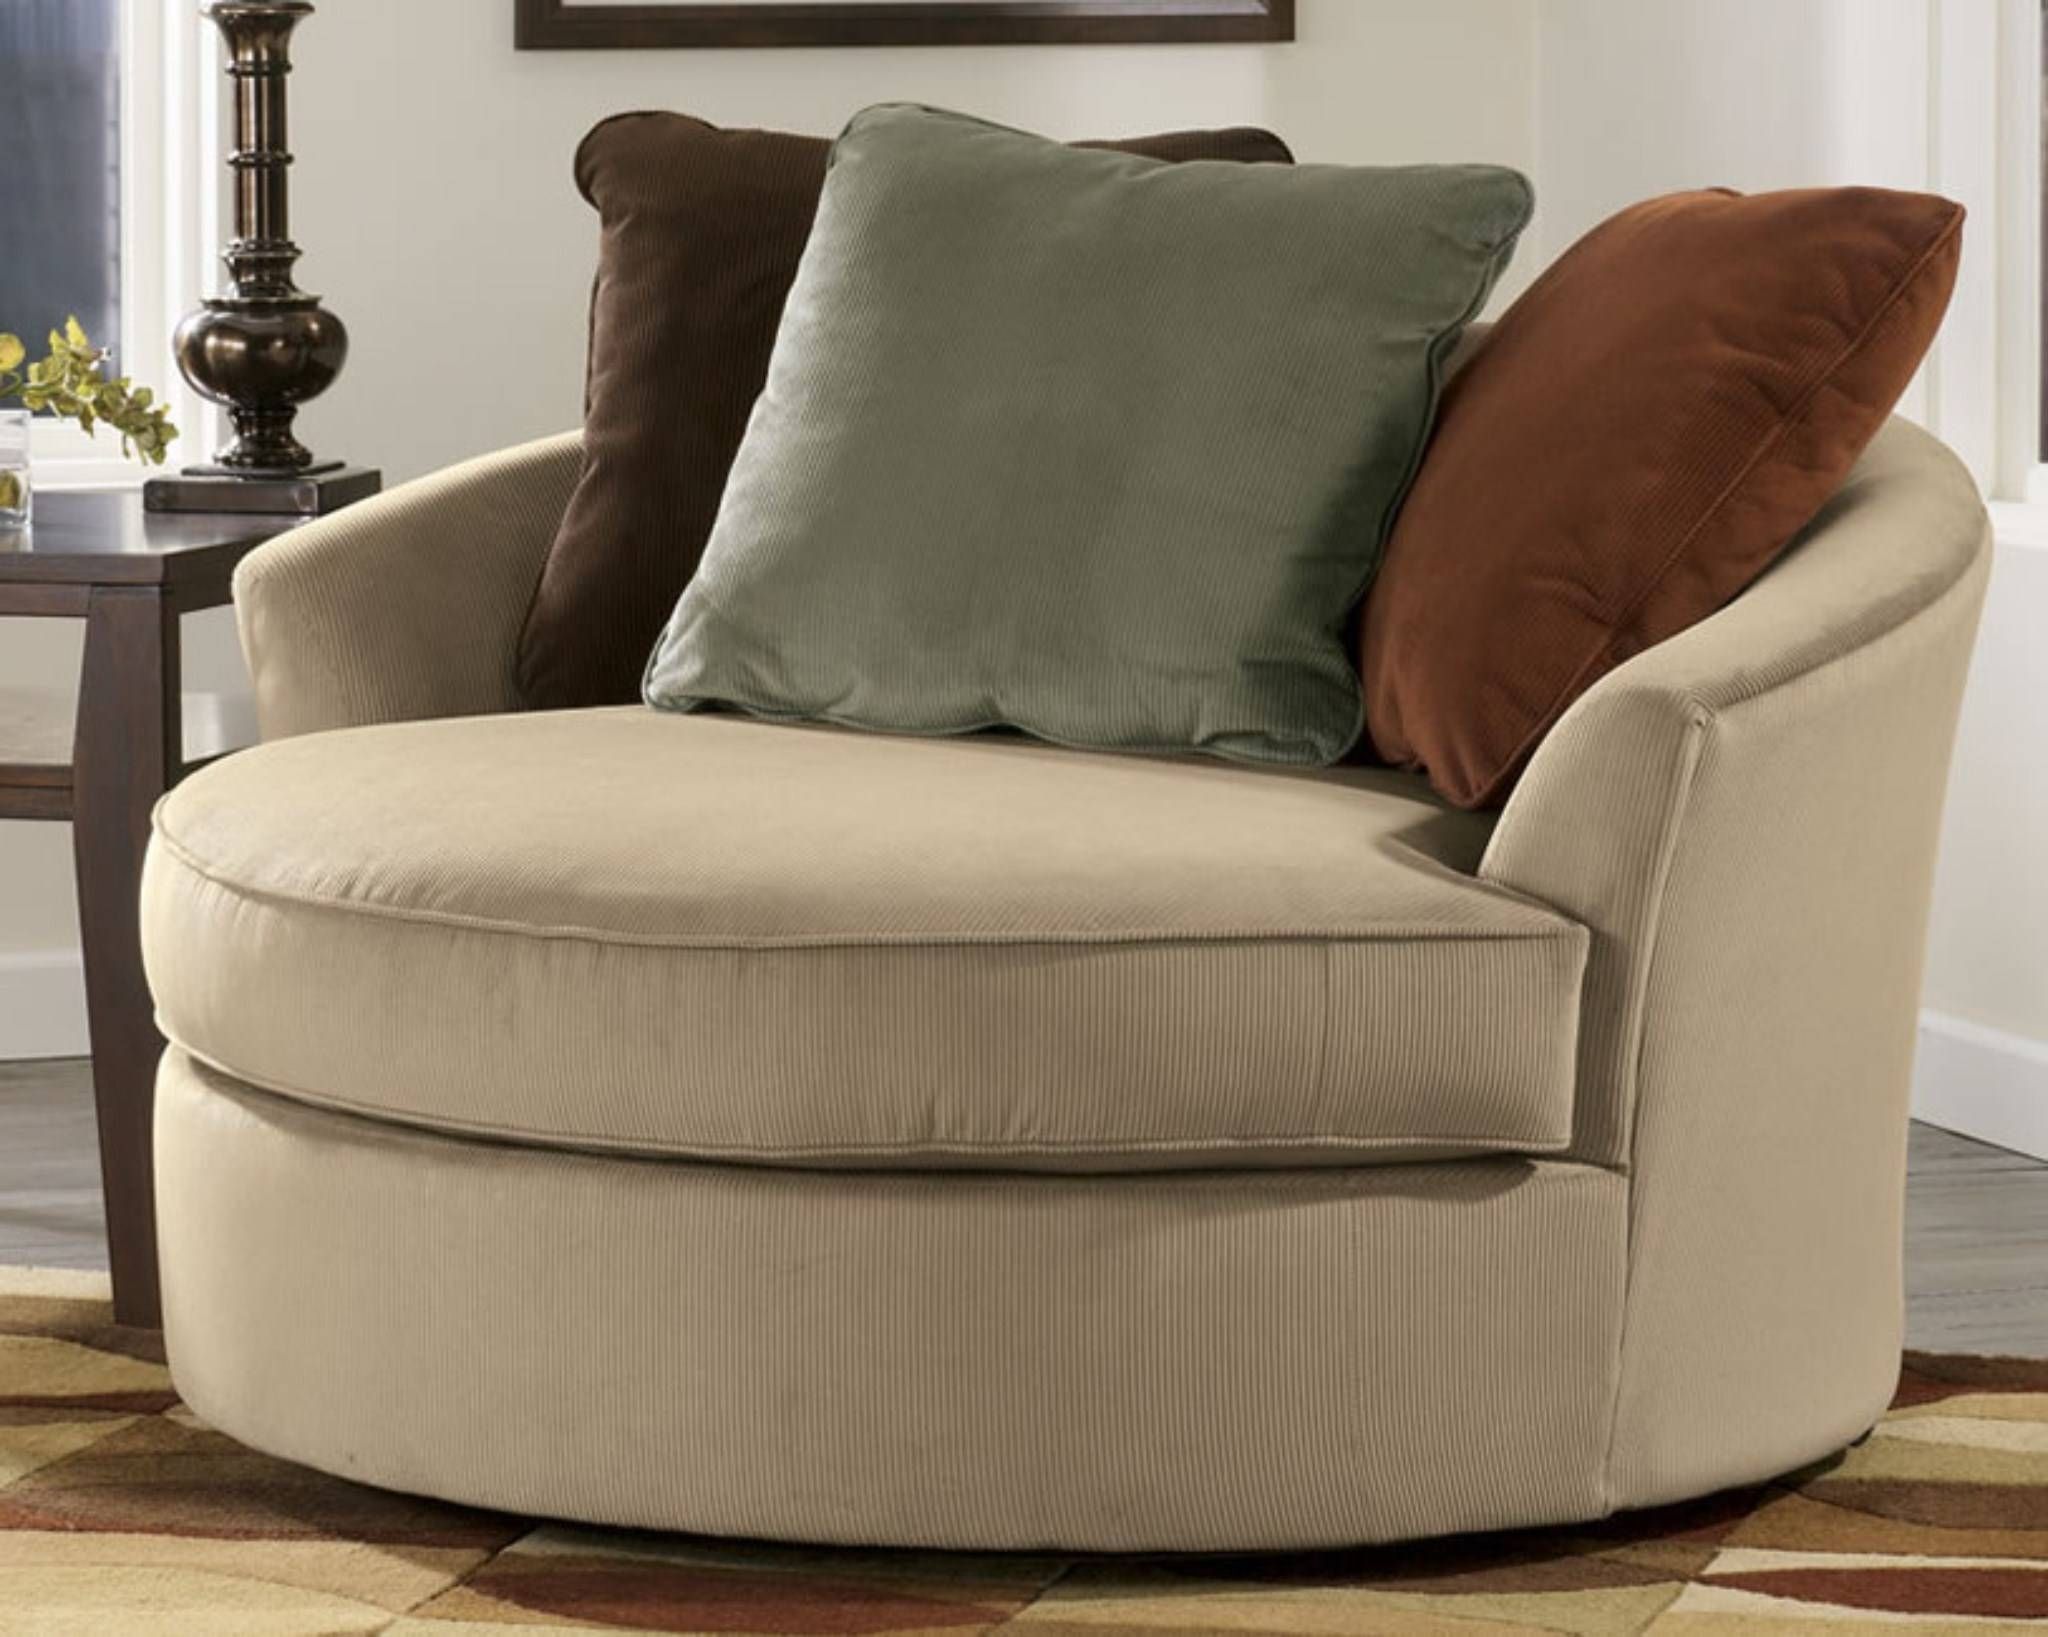 Round Swivel Sofa Chair – Leather Sectional Sofa Throughout Round Swivel Sofa Chairs (View 2 of 30)